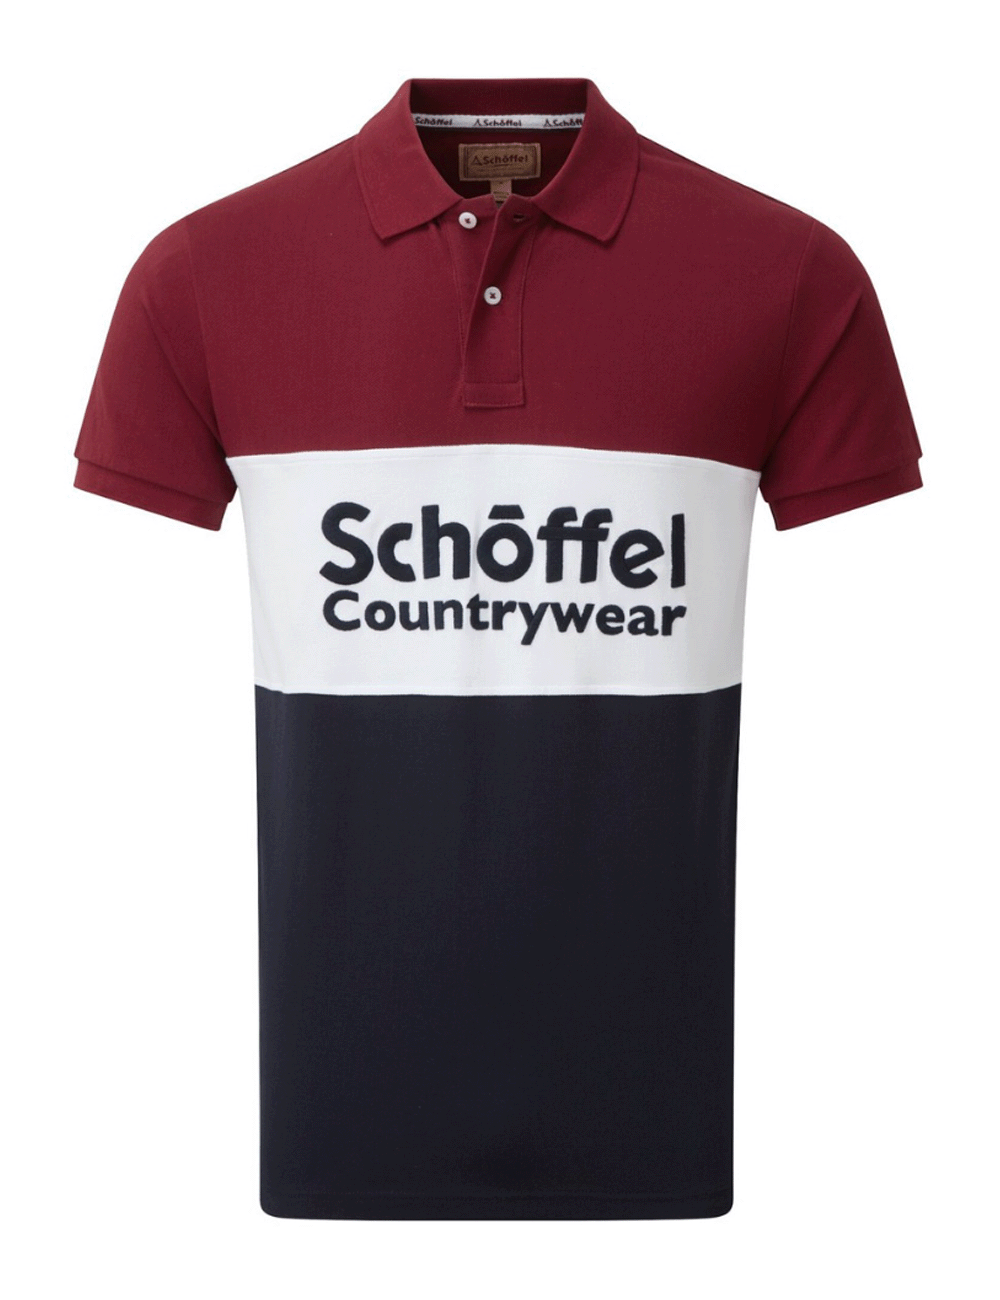 Schoffel's Exeter Heritage Polo Shirt in Bordeaux on a white background